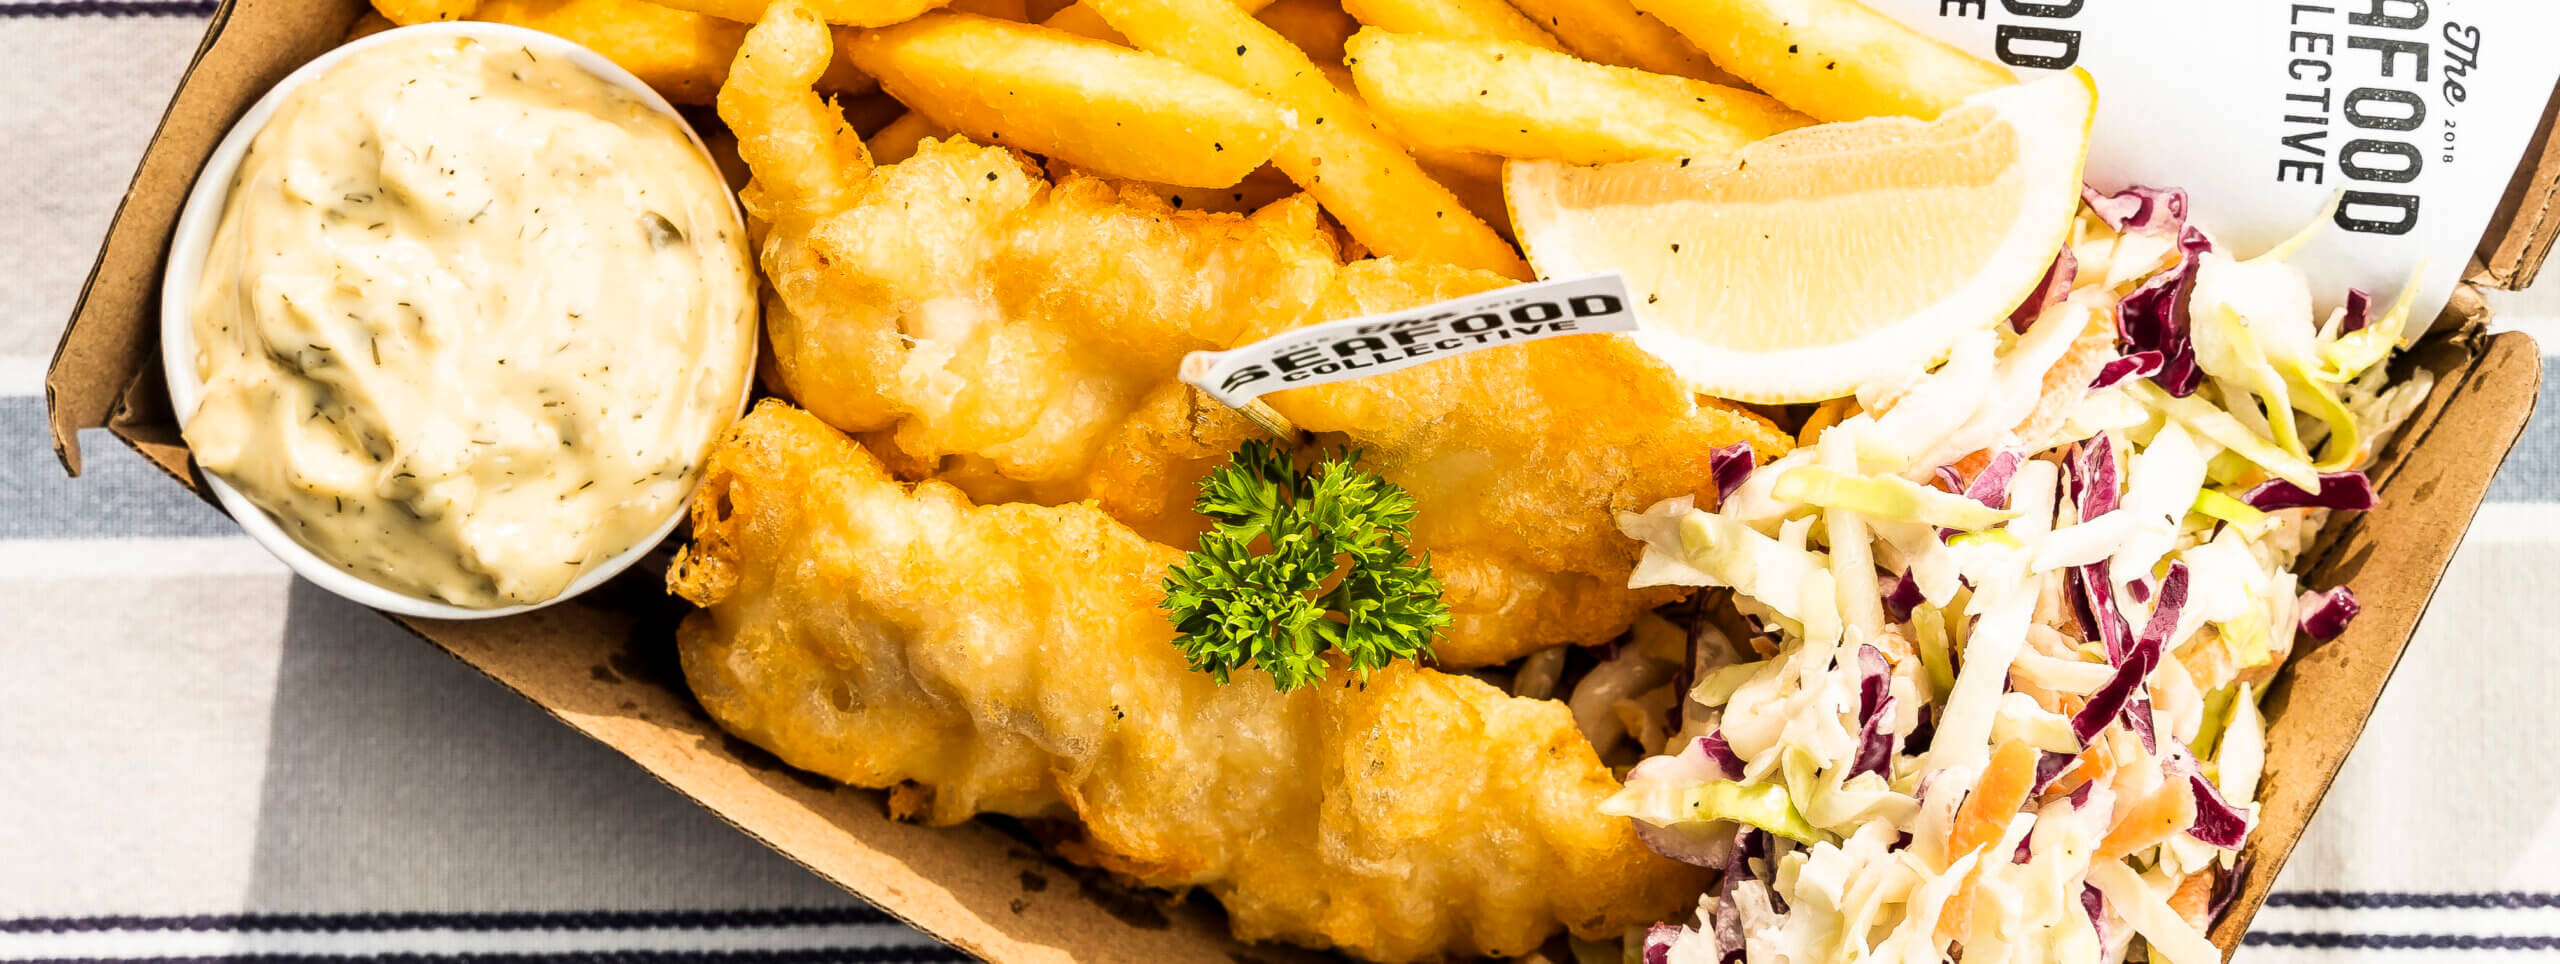 How To Order Your Favourite Fish and Chips Online?